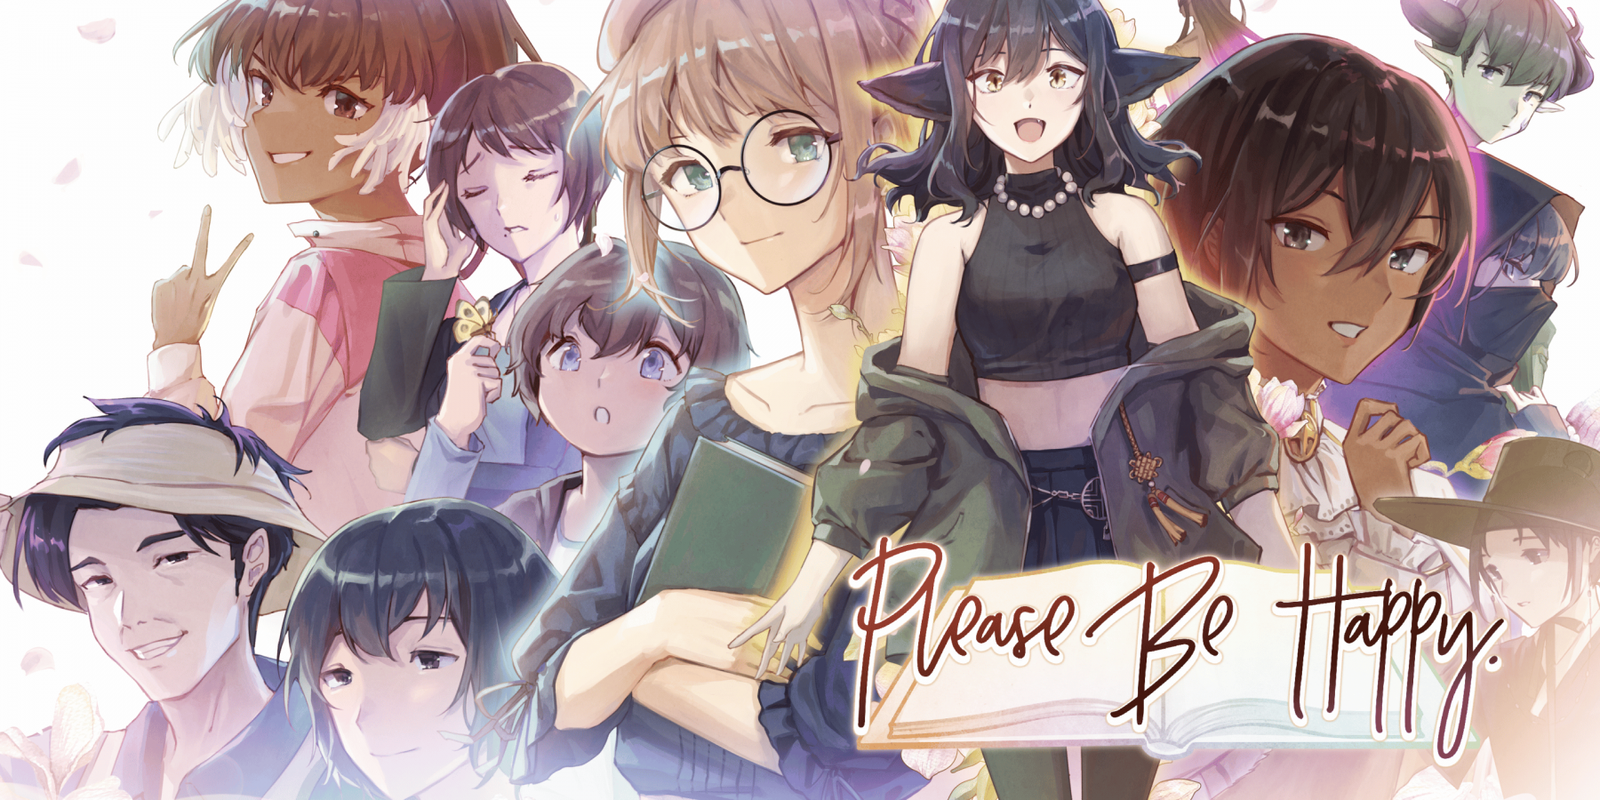 Banner for the game please be happy, featuring the game's full cast softly lit in white.